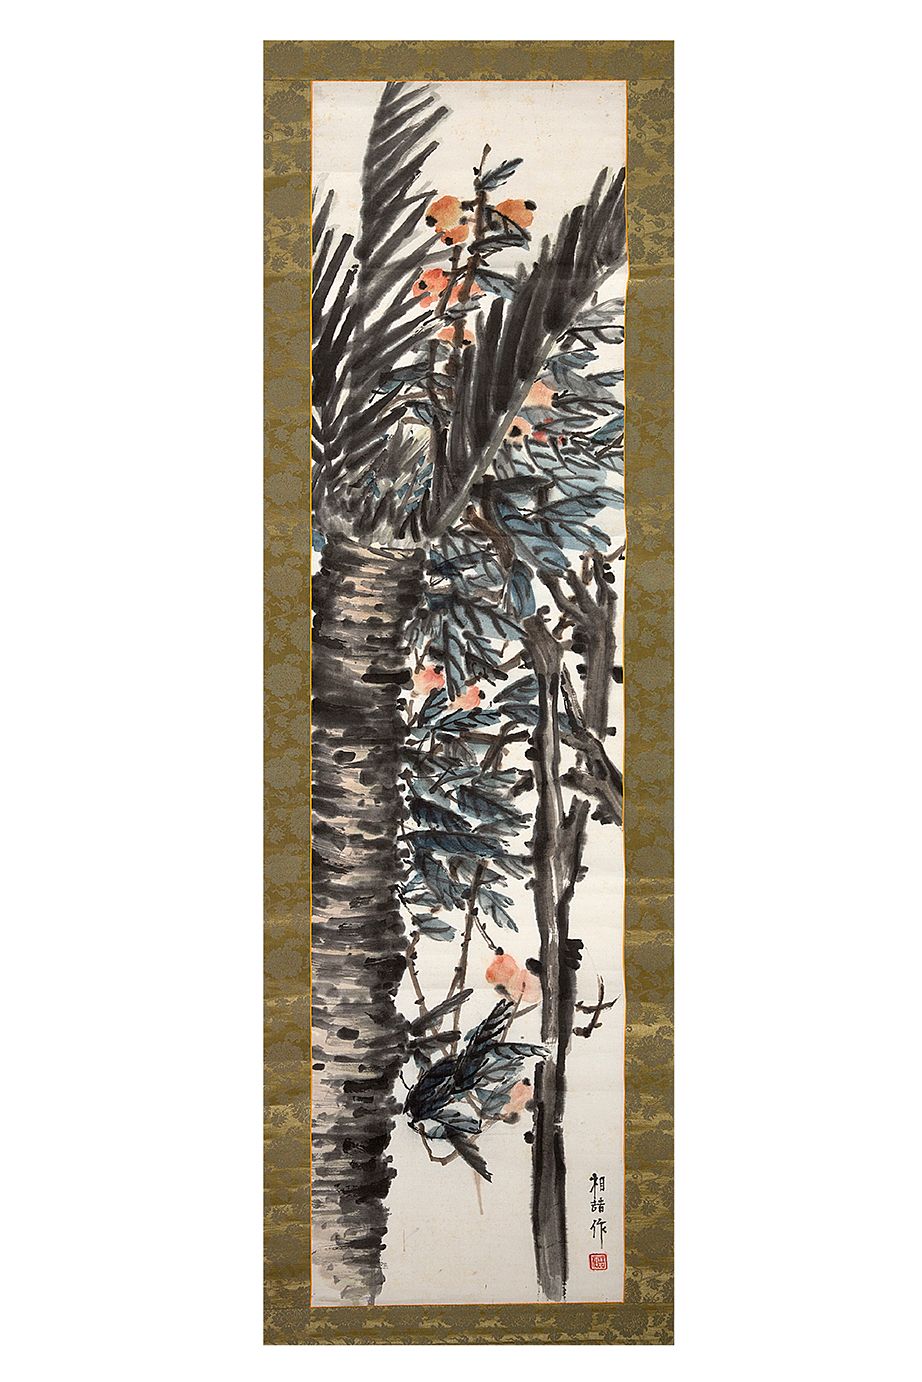 XIANG ZHE XXe SIÈCLE Painting
Ink and colors on paper mounted in a vertical scro&hellip;